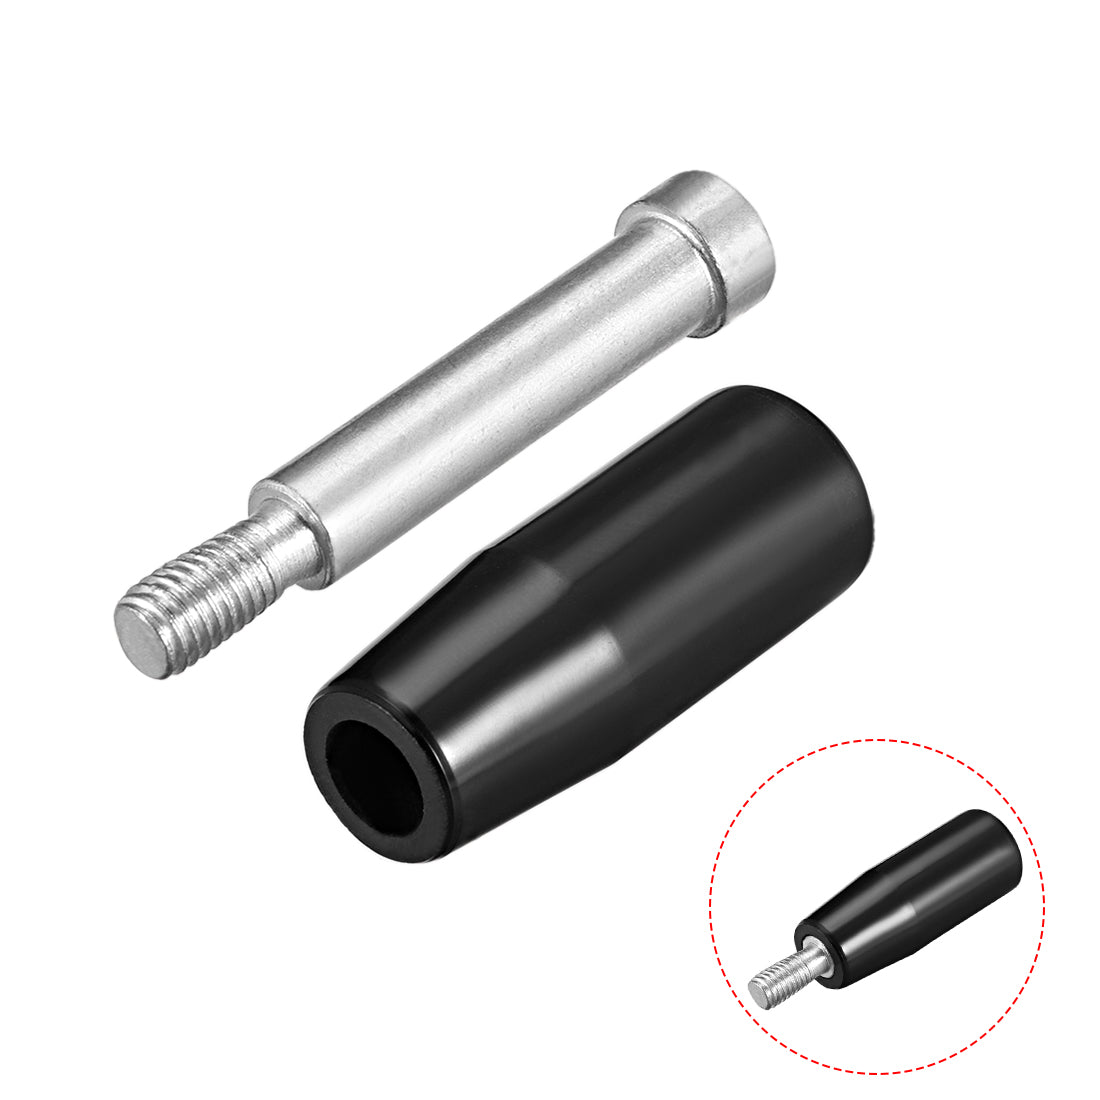 uxcell Uxcell 2 Pcs Revolving Handwheel Machine Handle M8 Male Threaded Stem 51mm Handle Length for Milling Machine